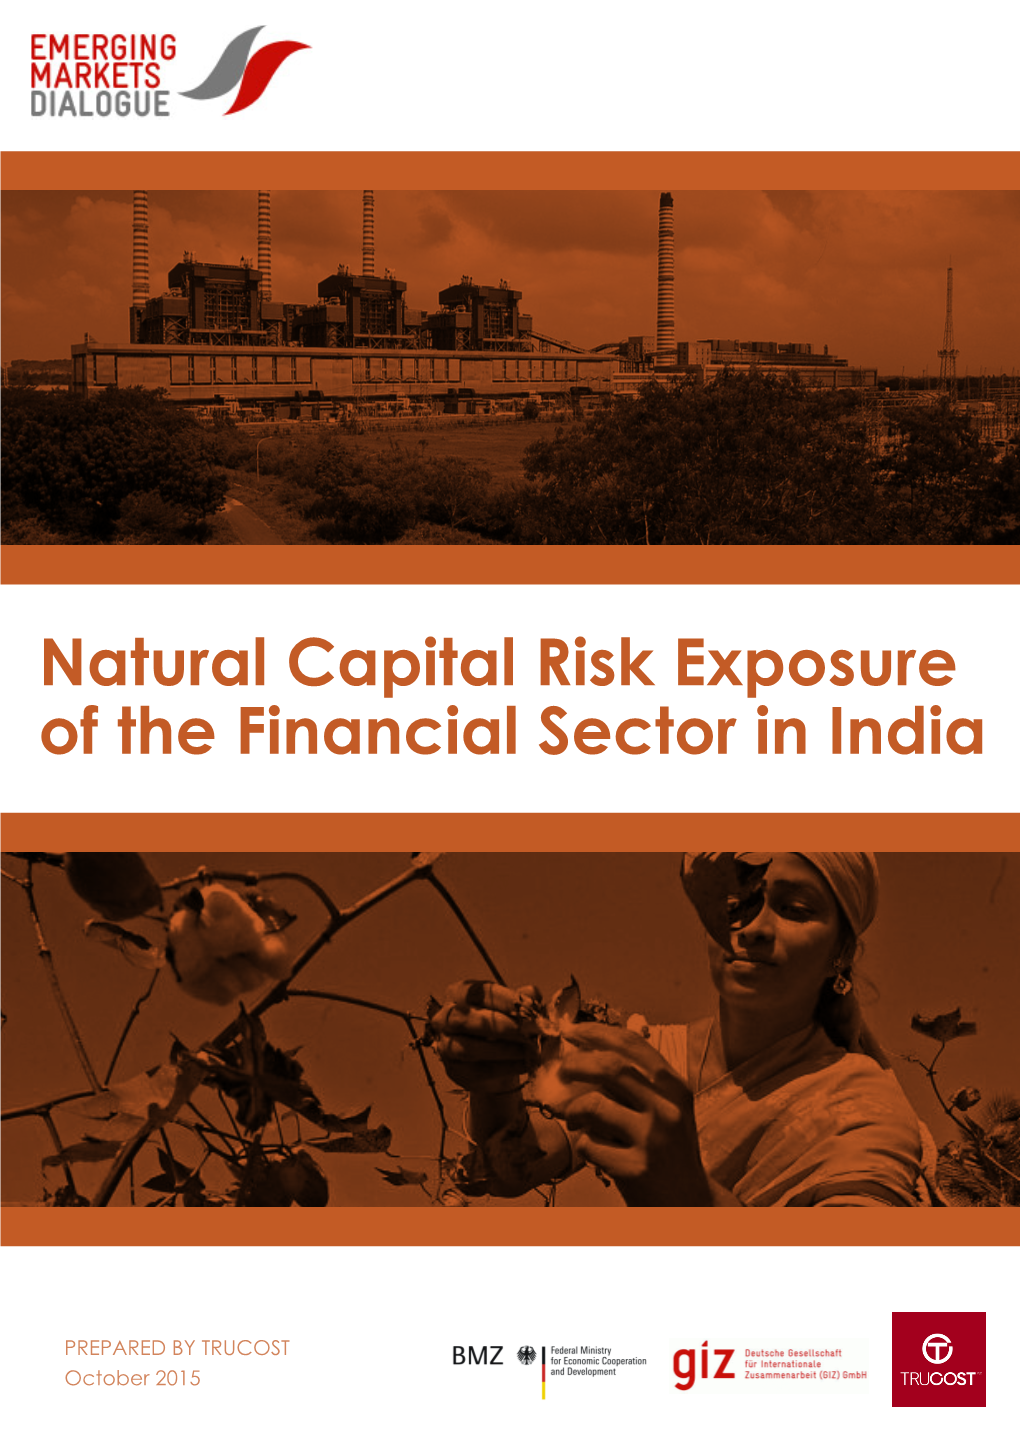 Natural Capital Risk Exposure of the Financial Sector in India